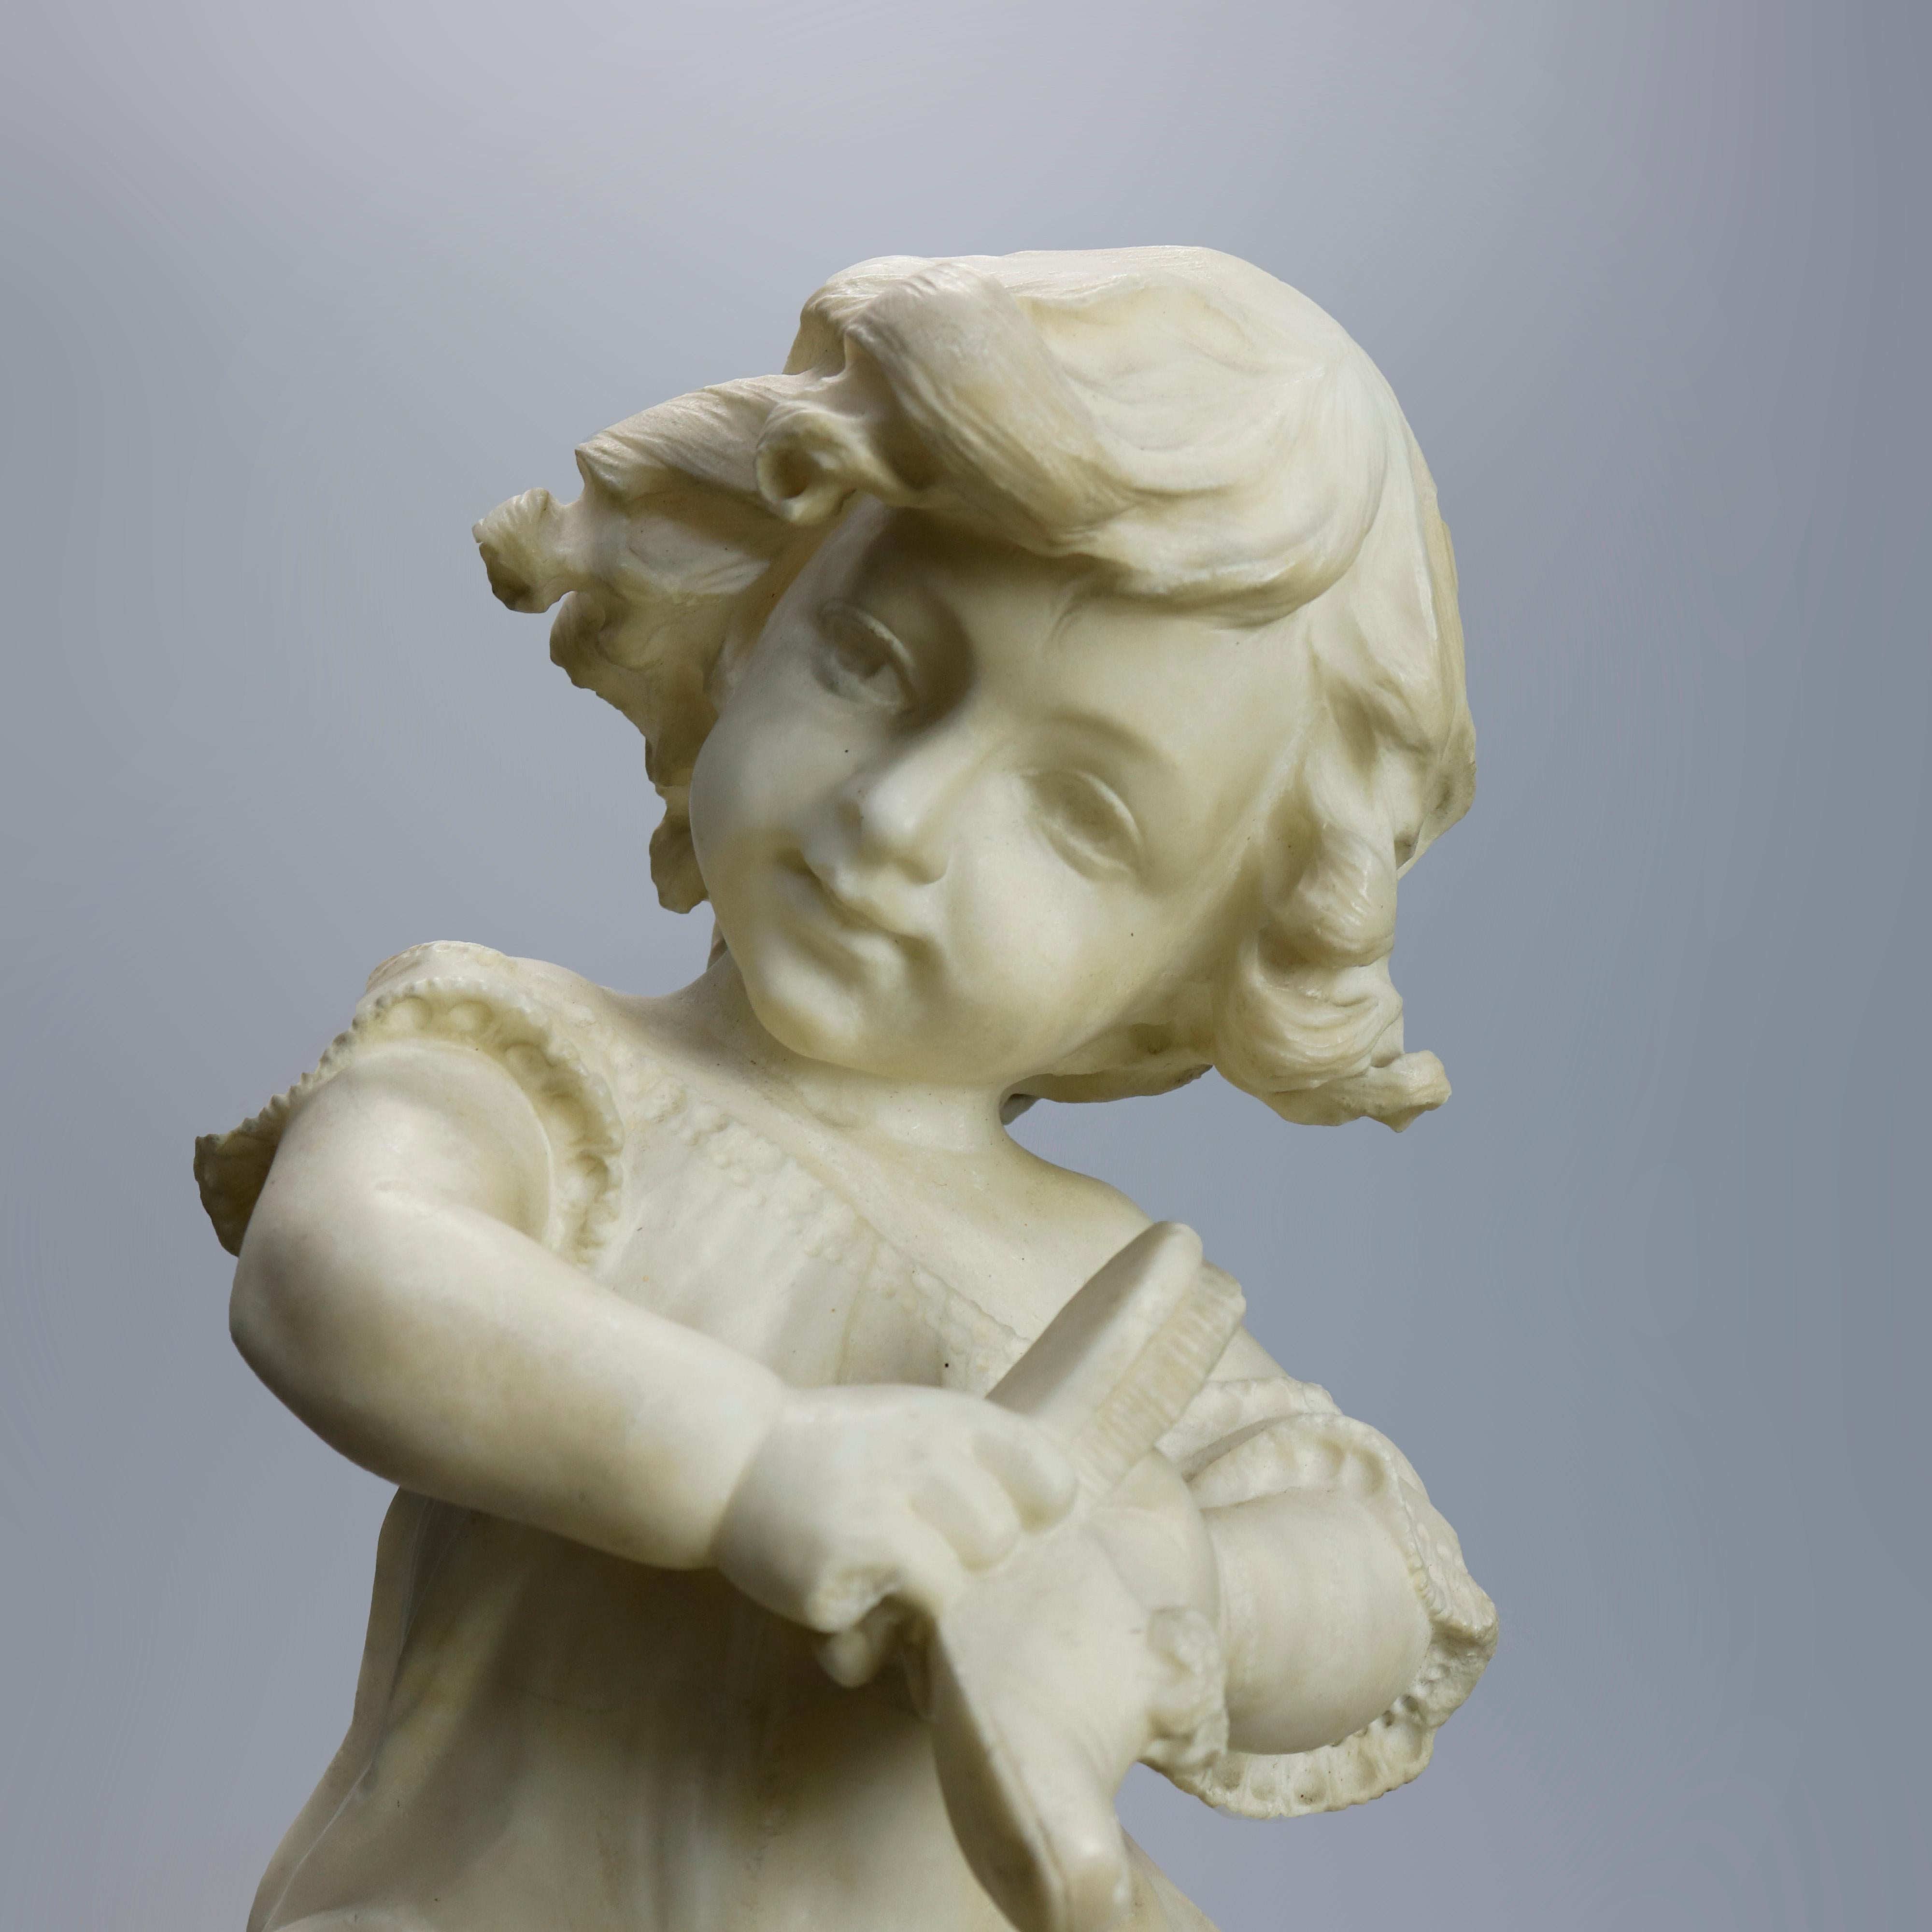 An antique figural sculpture by Adolpho Cipriani (Italian, 1857-1941) offers carved alabaster depiction of a young girl seated on a stool and putting on shoes, artist signed on seat as photographed, c1890

Measures: 18.25